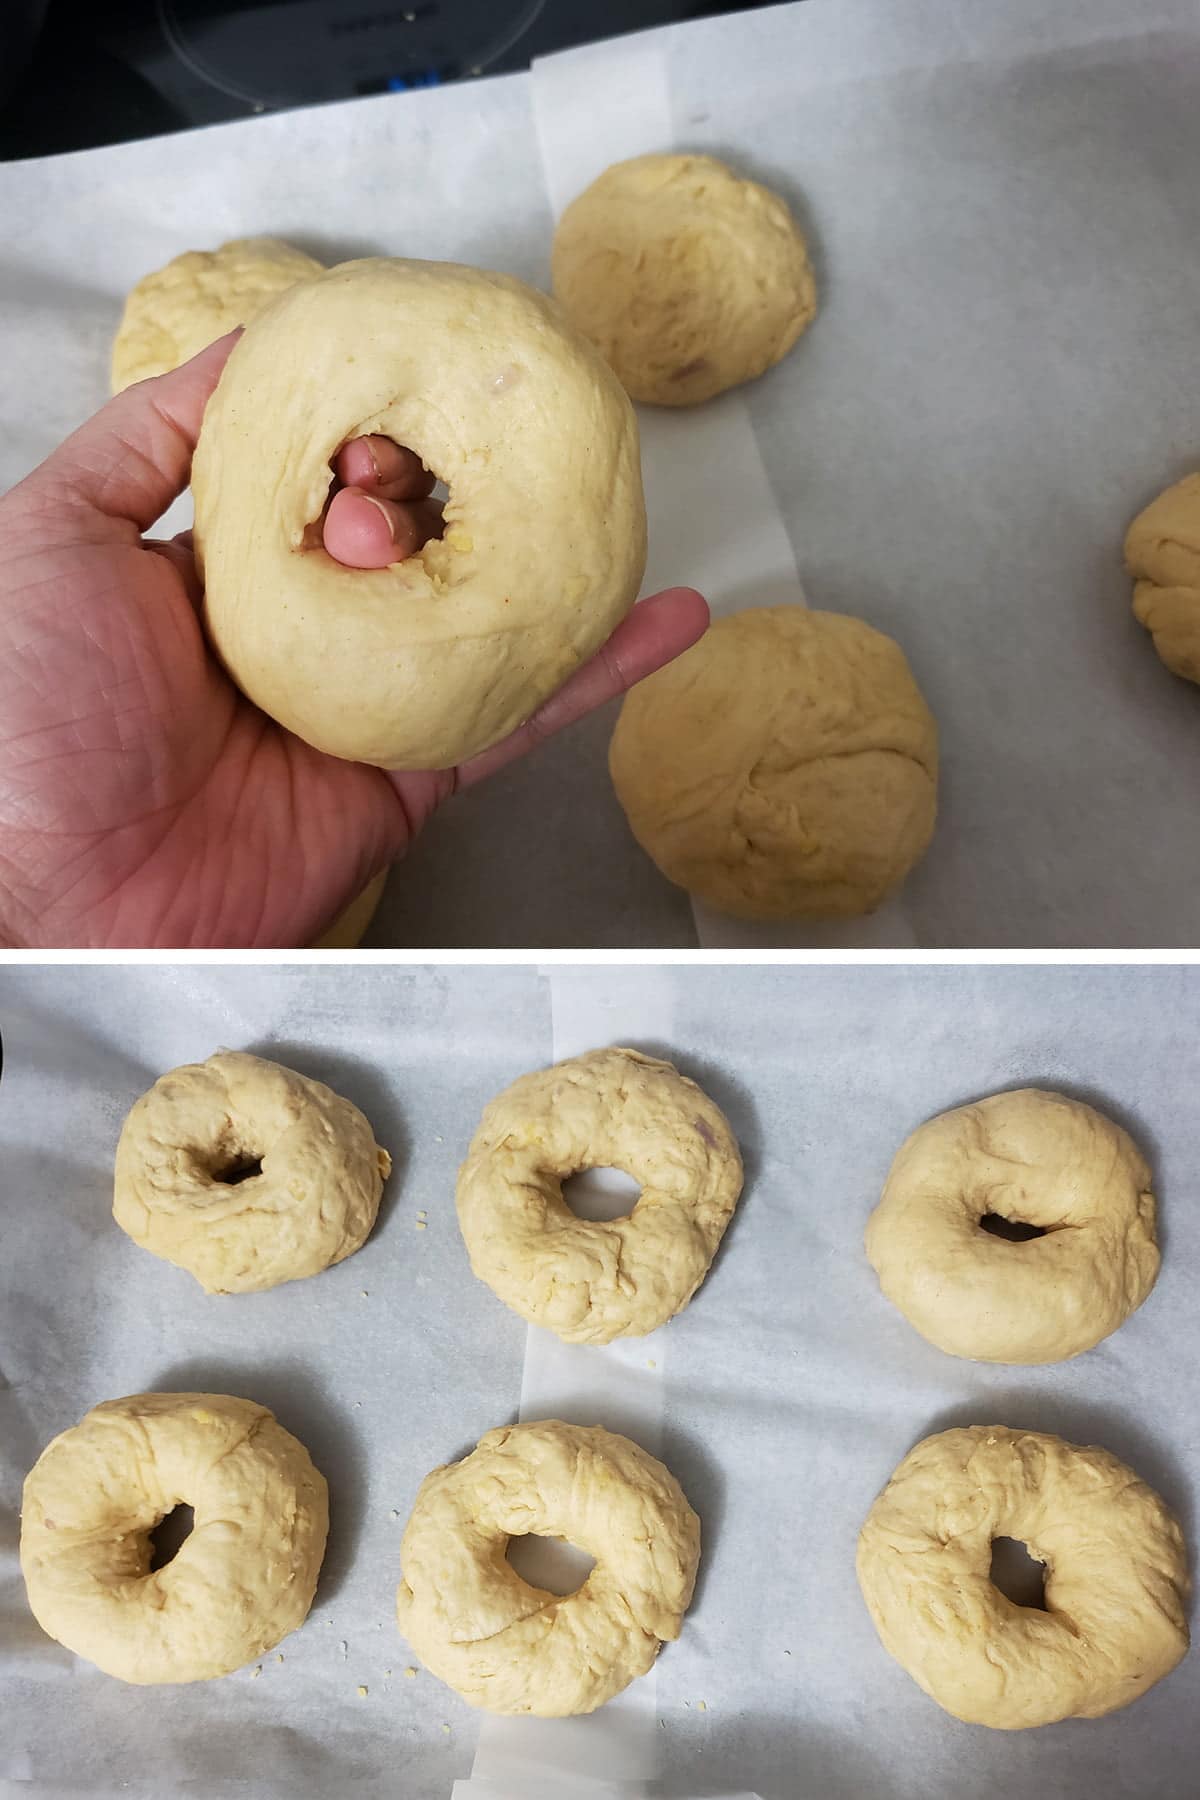 A two part compilation image showing a hole being poked through a ball of bagel dough, and 6 formed bagels arranged on parchment.